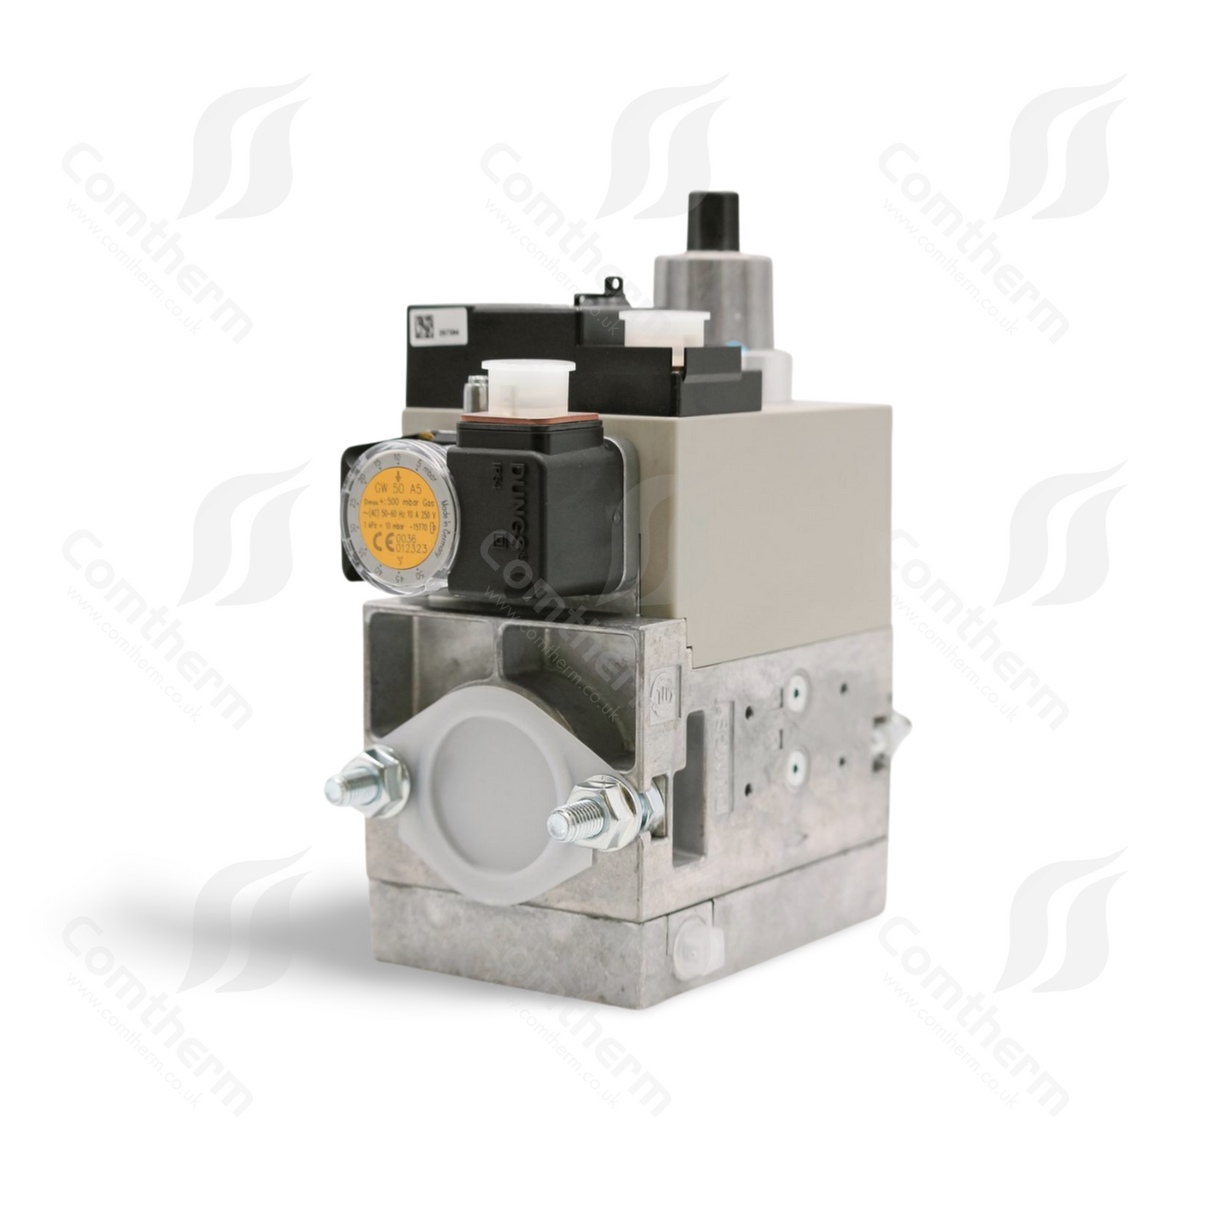 Dungs MB-DLE 410 B01 S20 + GW50A5 Multibloc Gas Valve - 230v